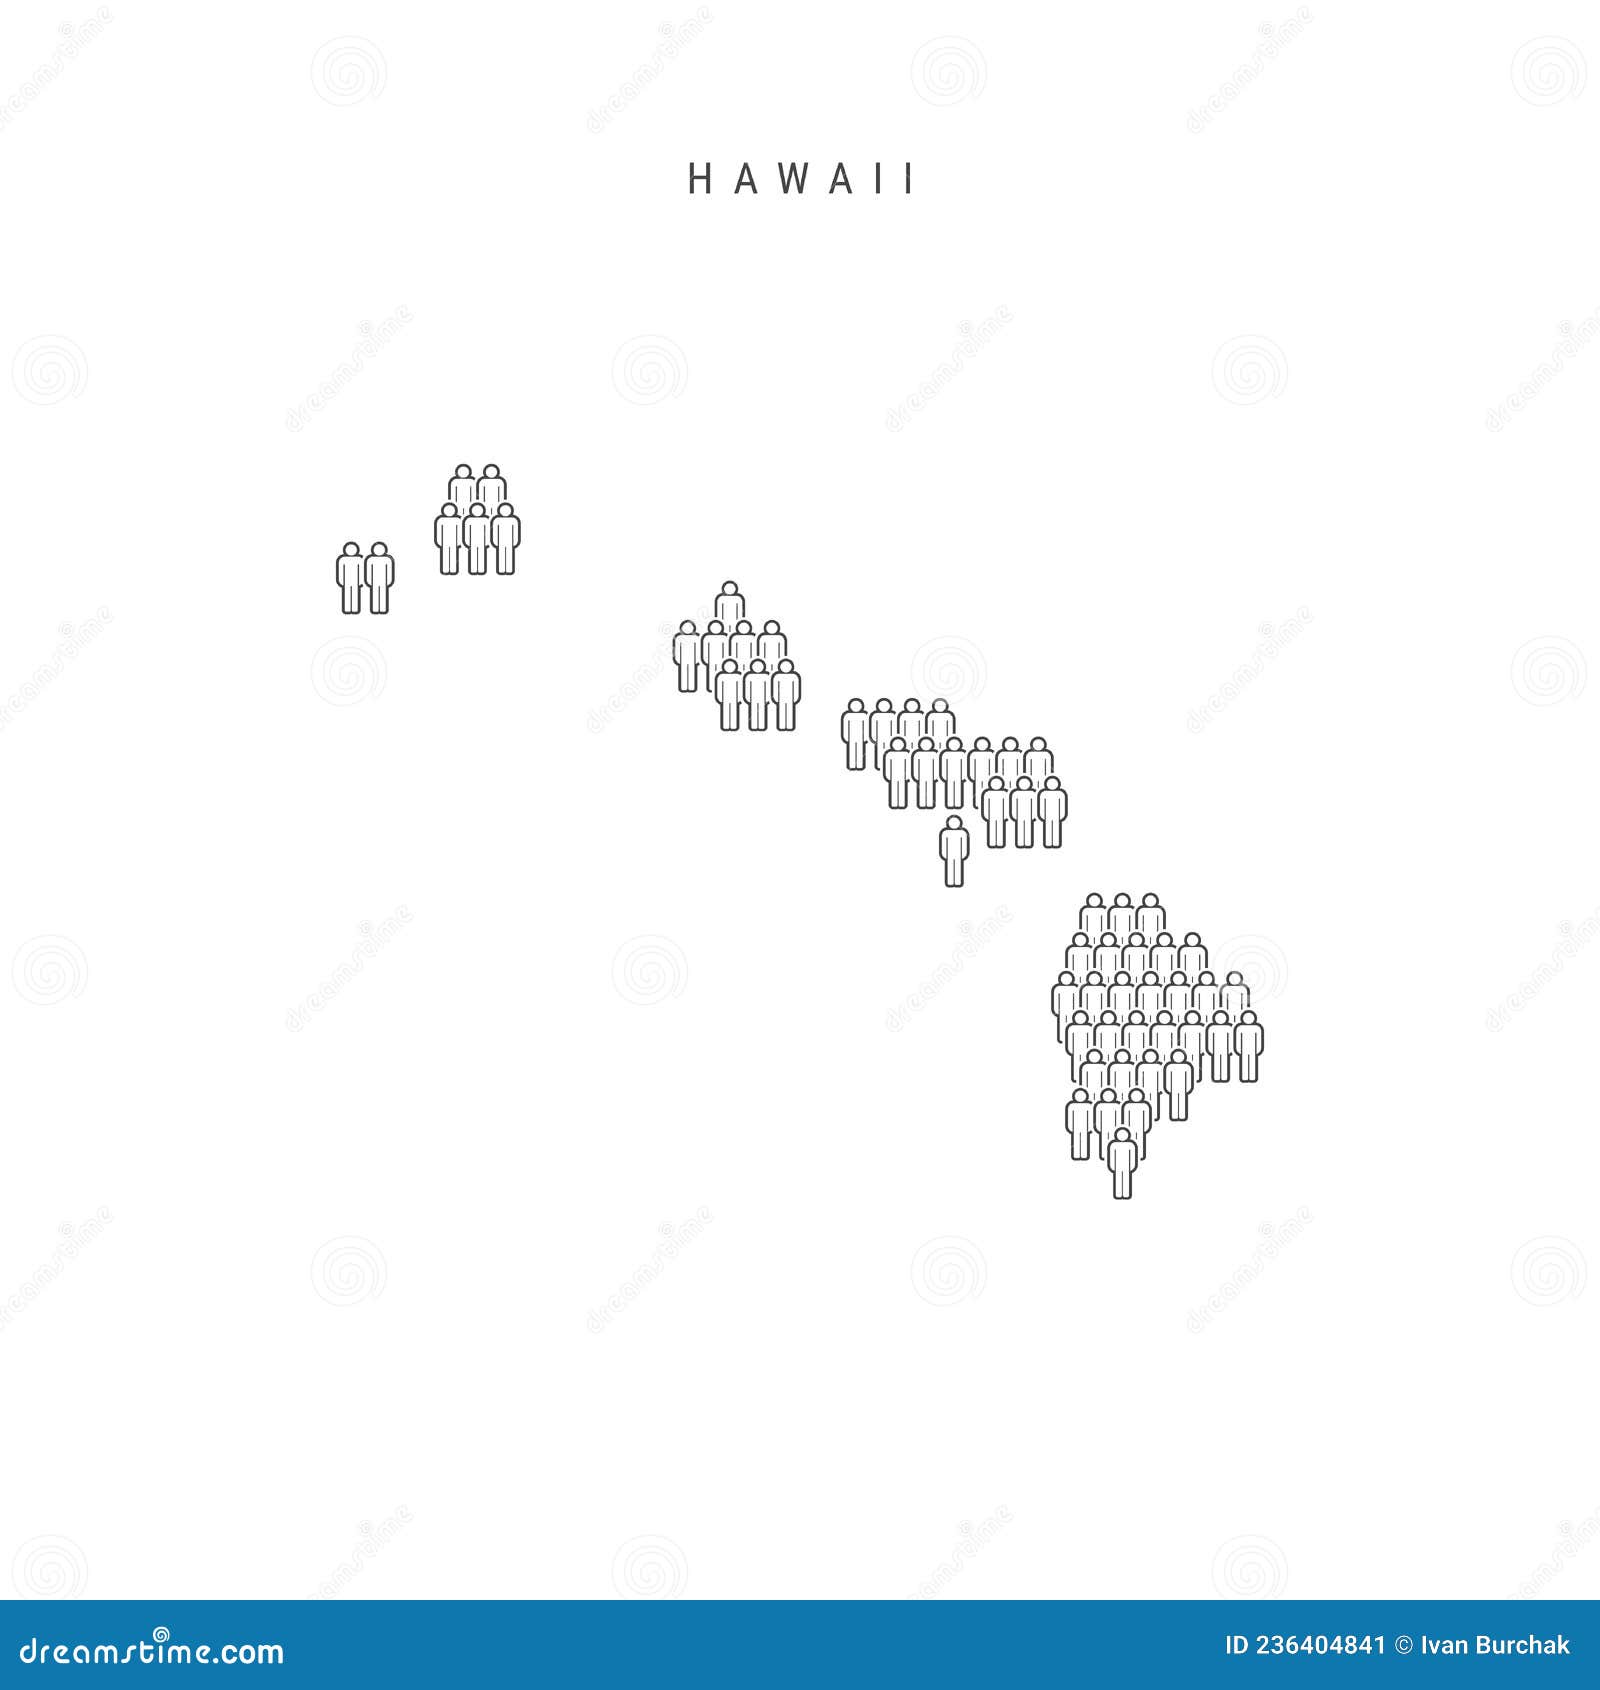 Vector People Map of Hawaii, US State. Stylized Silhouette, People